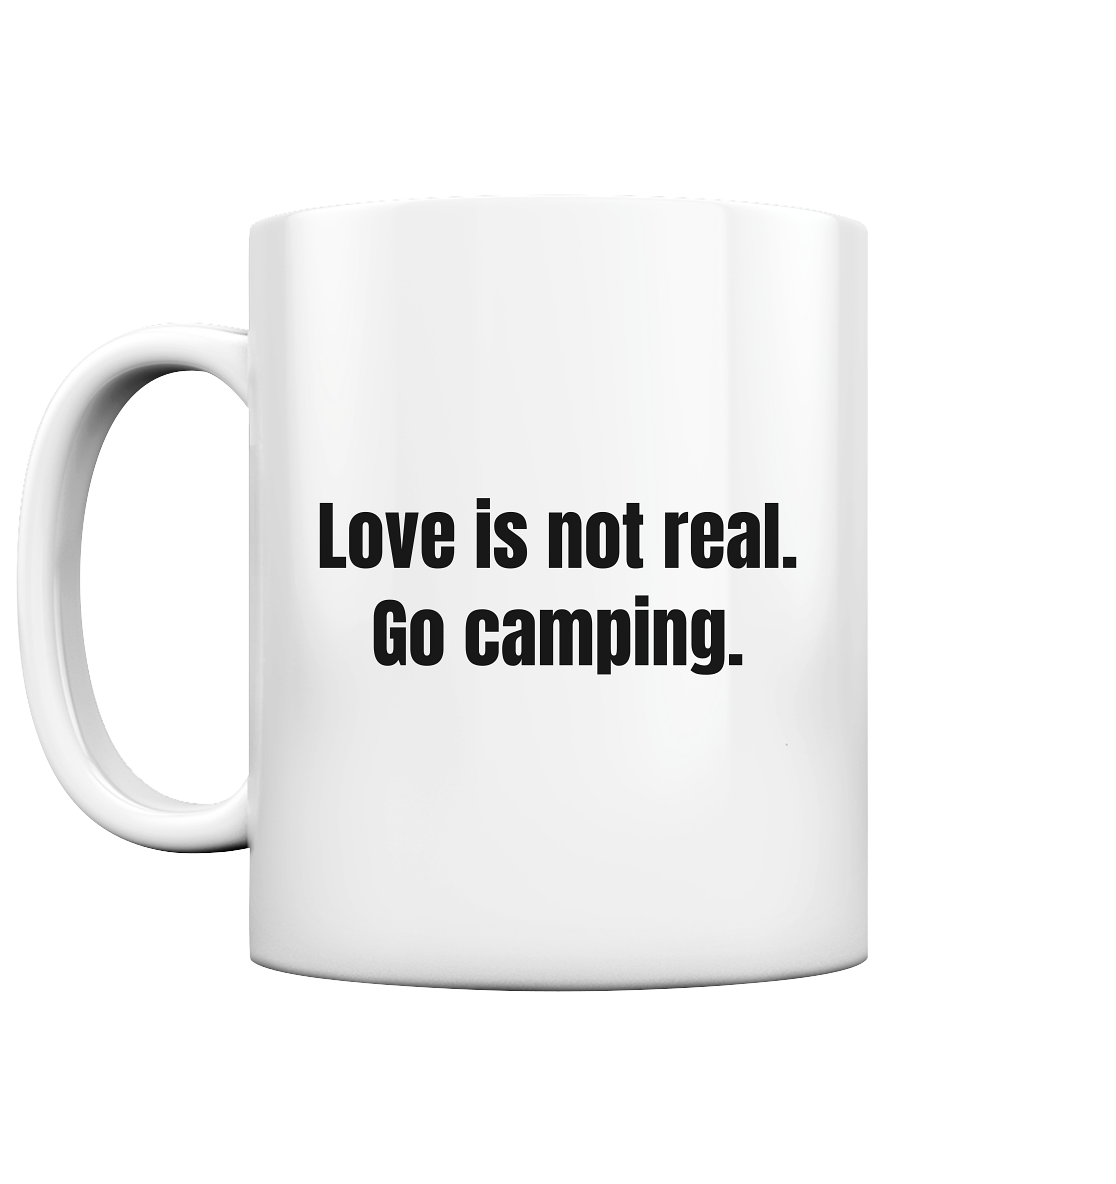 Love is not real. Go camping. - Tasse glossy